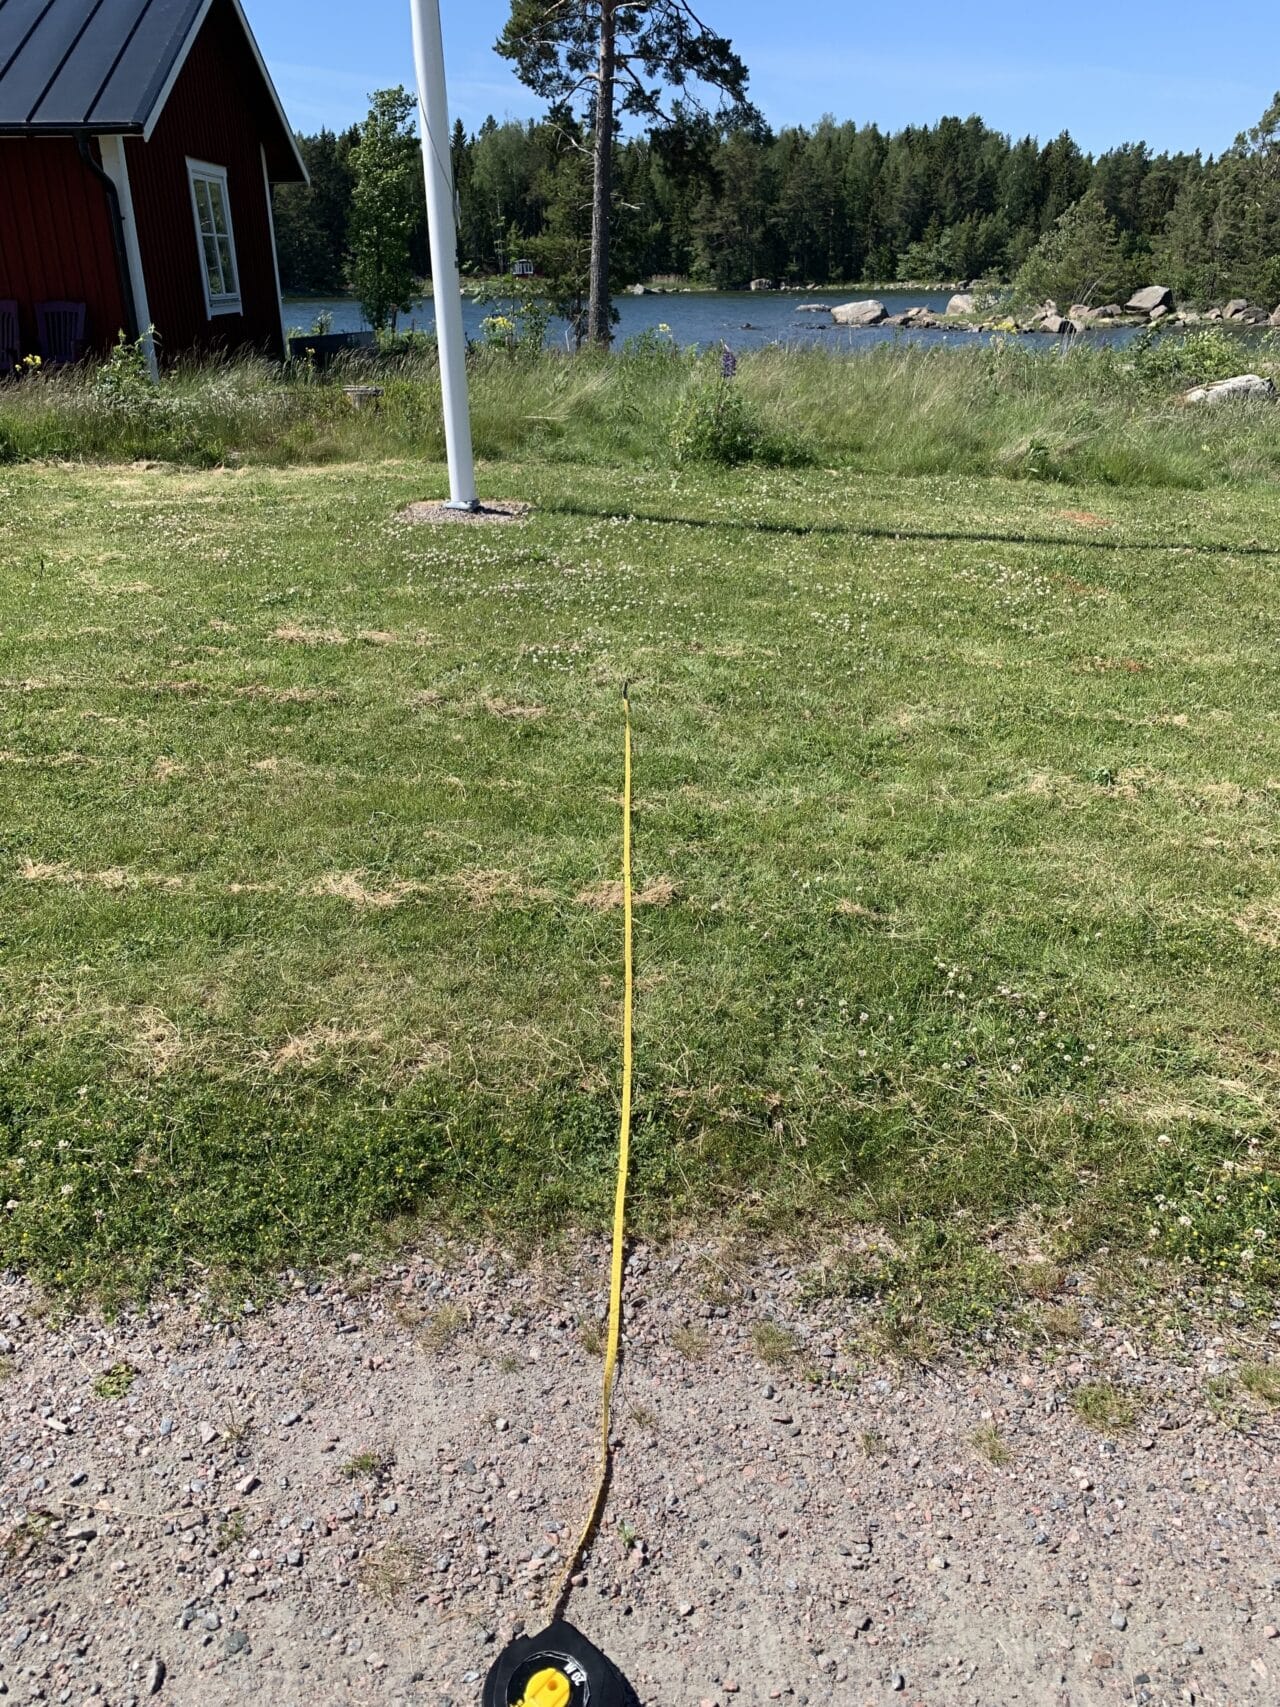 Measuring tape Rolled Out On Lawn With A Flagpole